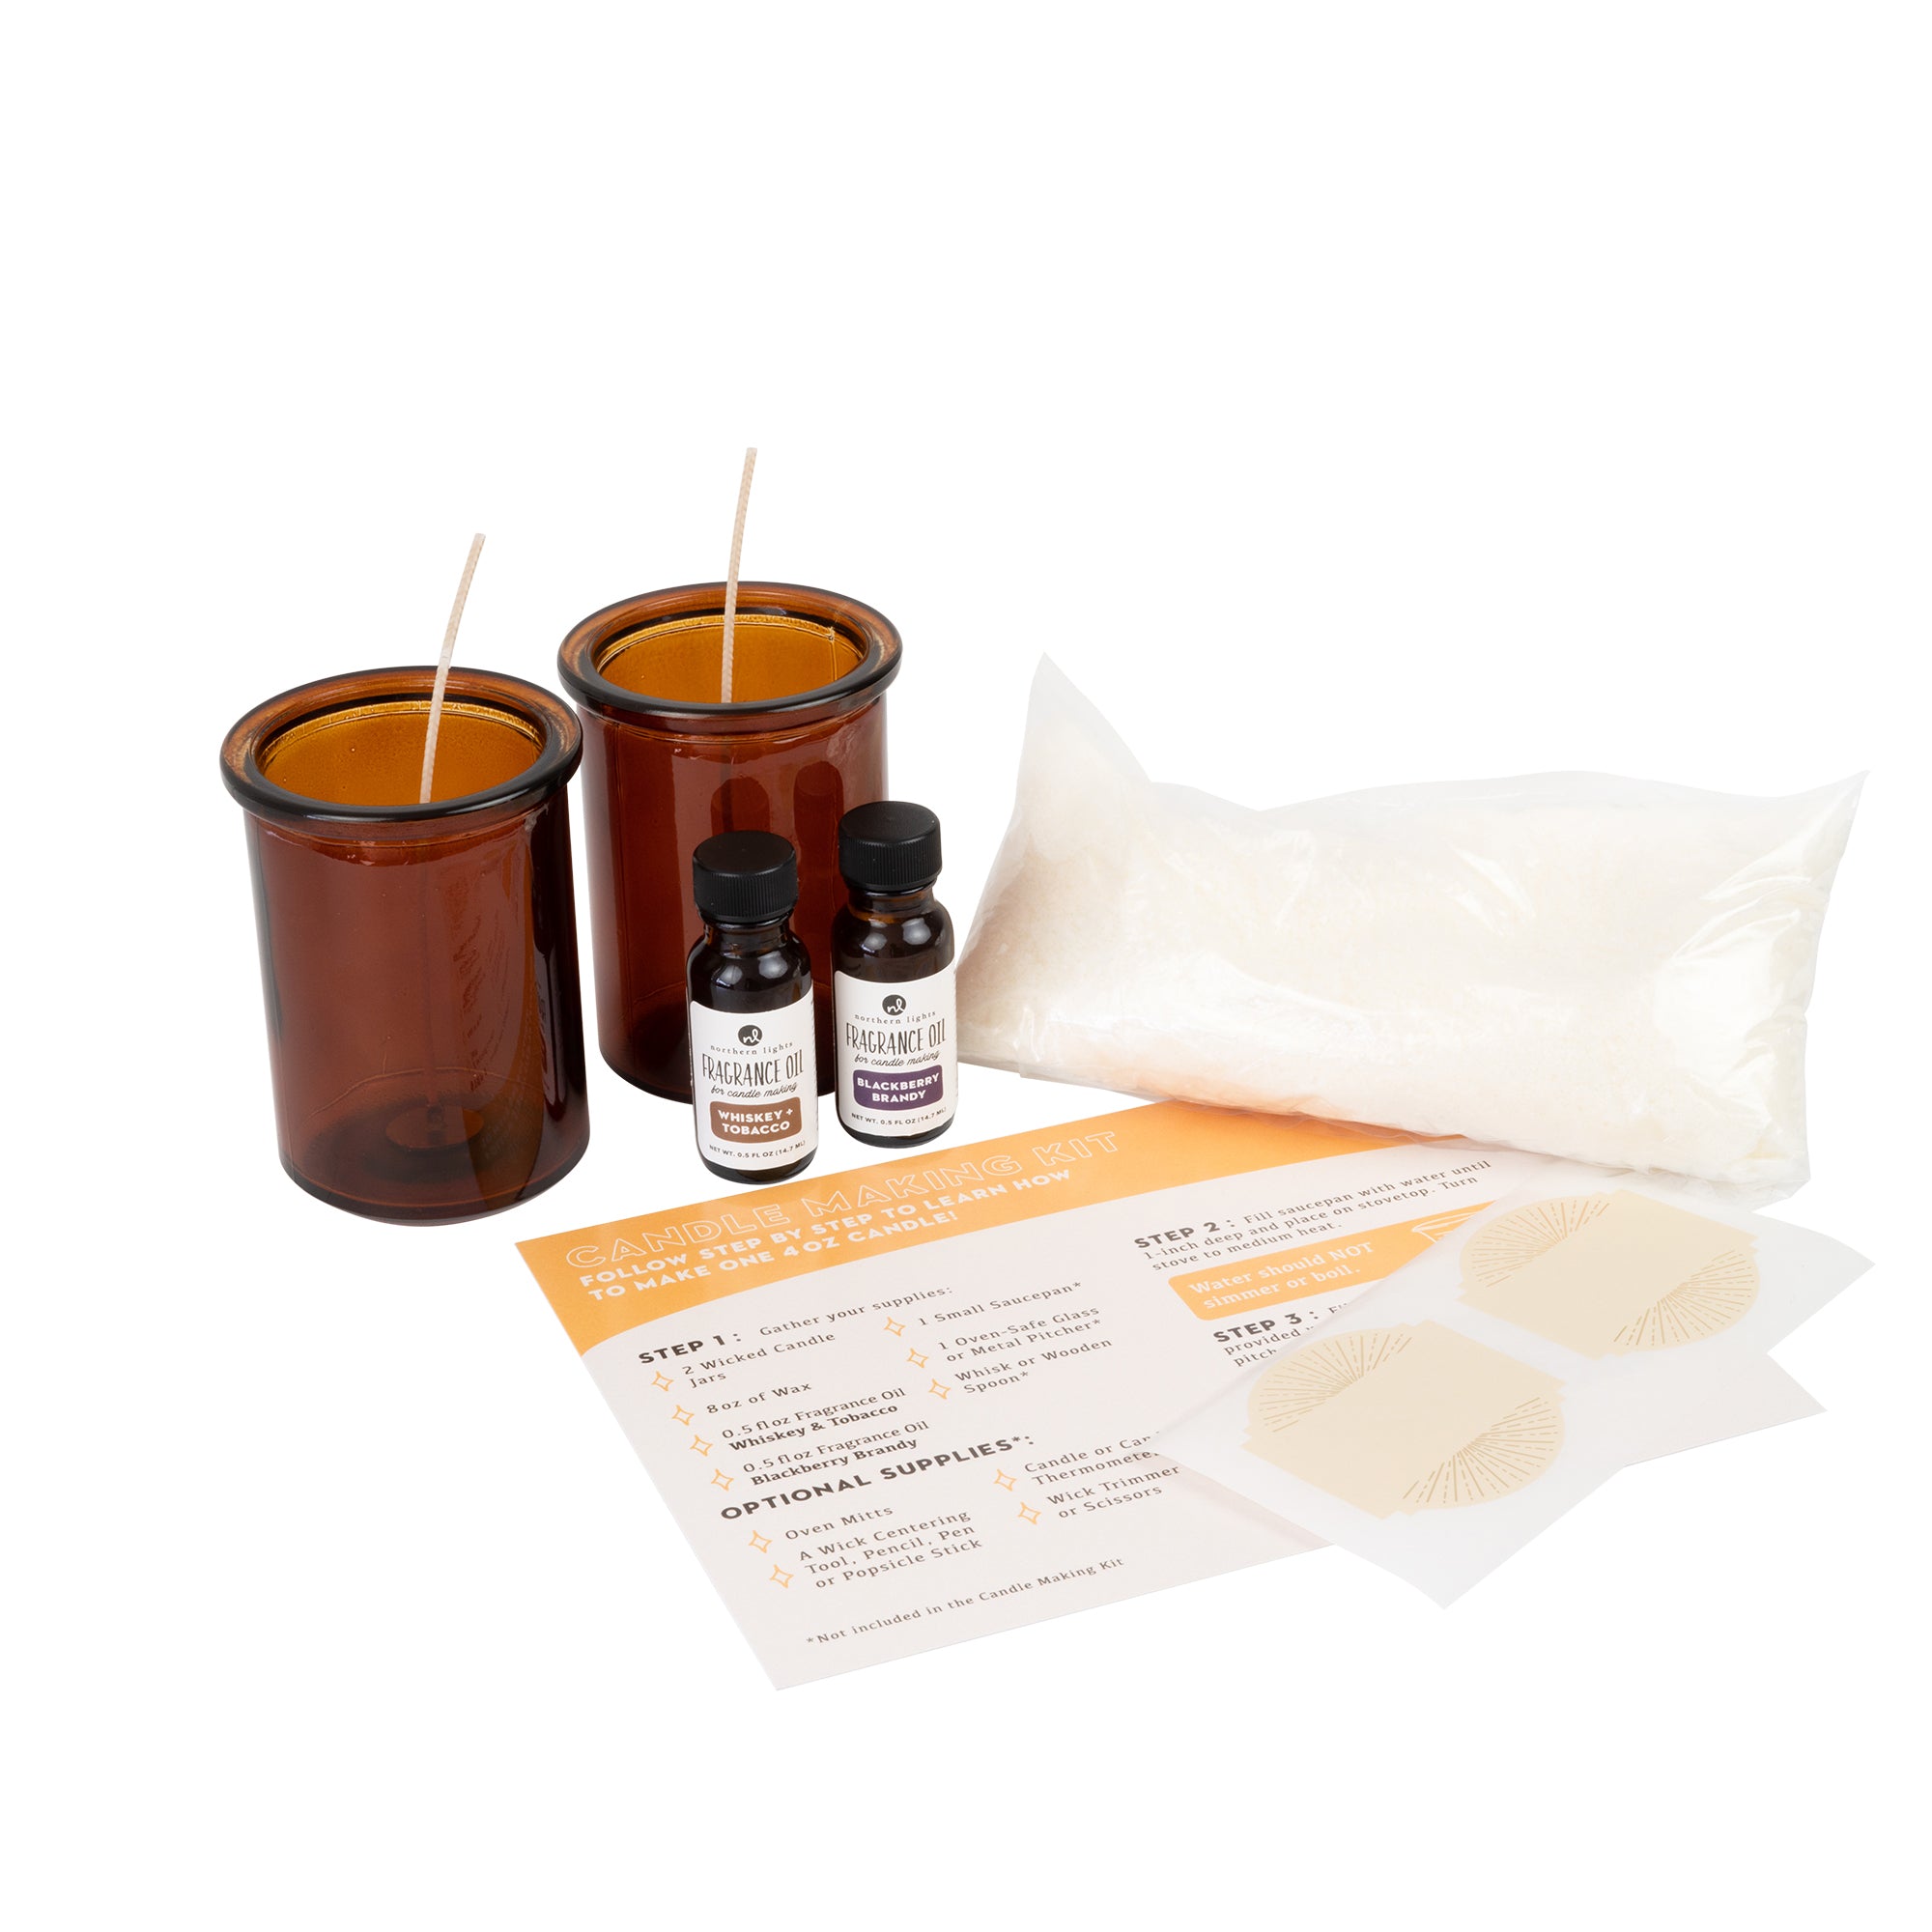 Candle Making Kit - 2pc 4 oz Amber Glass Candles – Northern Lights Candles